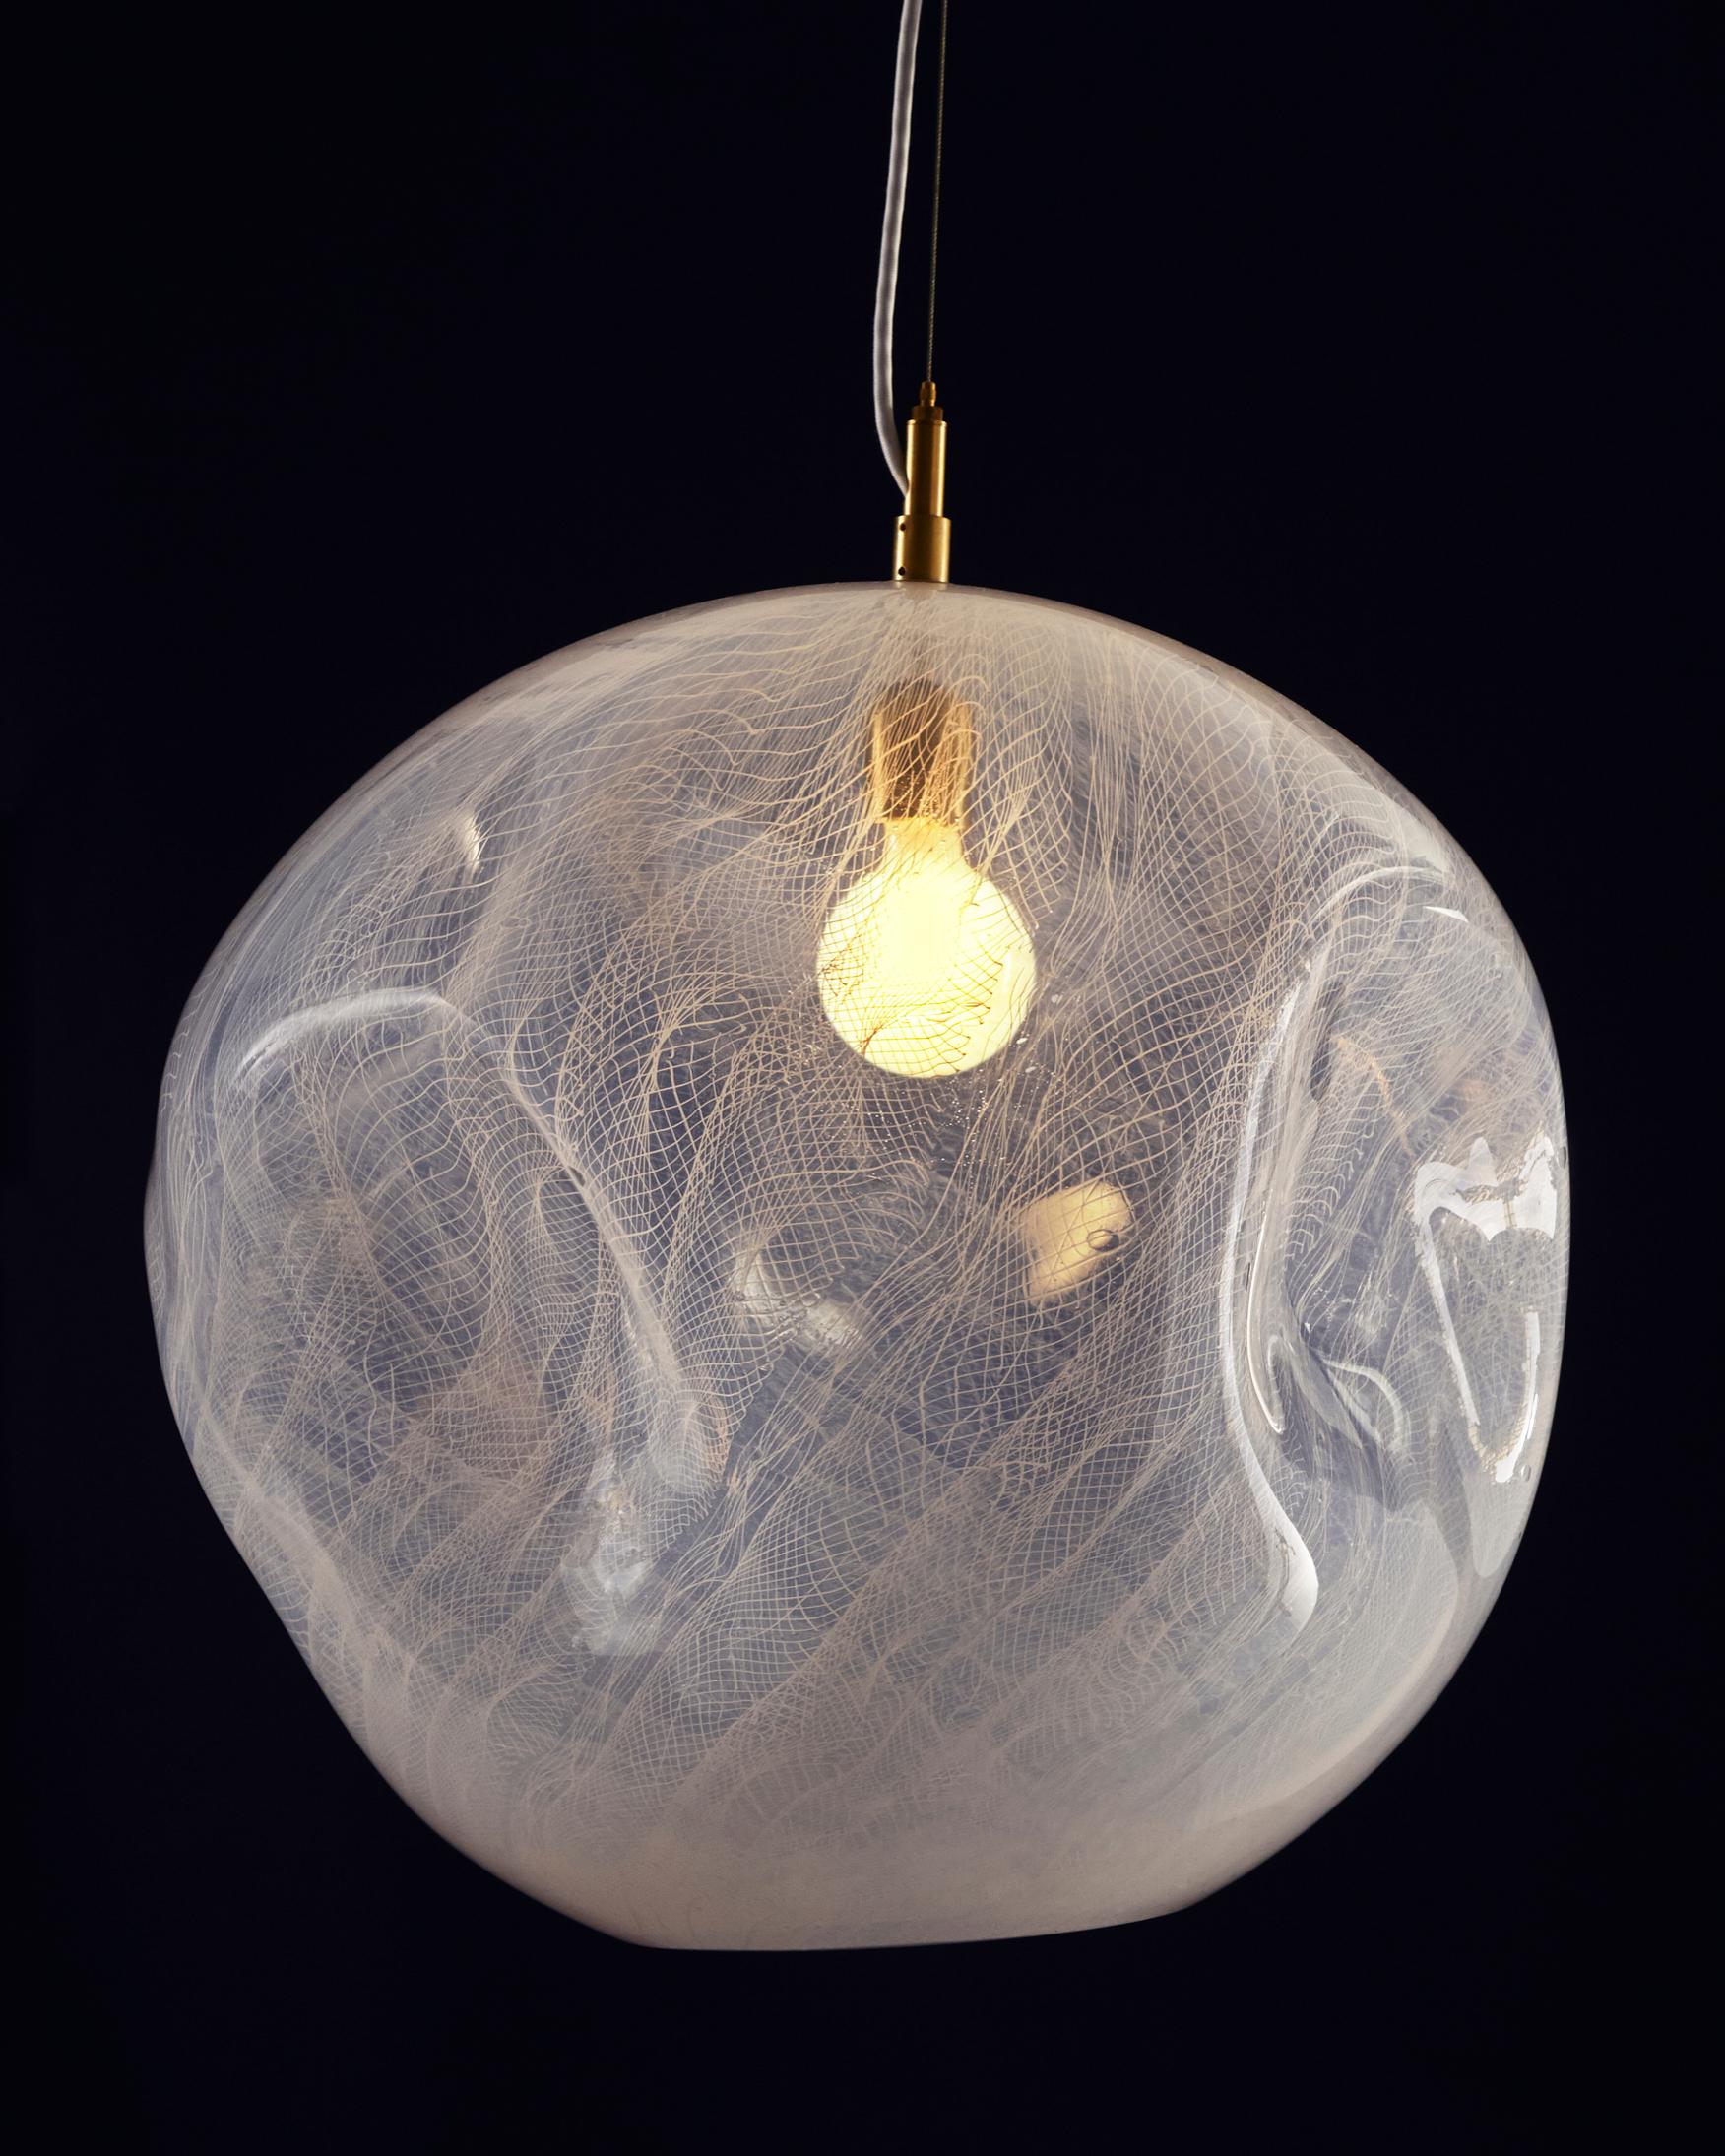 American Unique Illuminated Sculptural Pendant by Jeff Zimmerman and James Mongrain